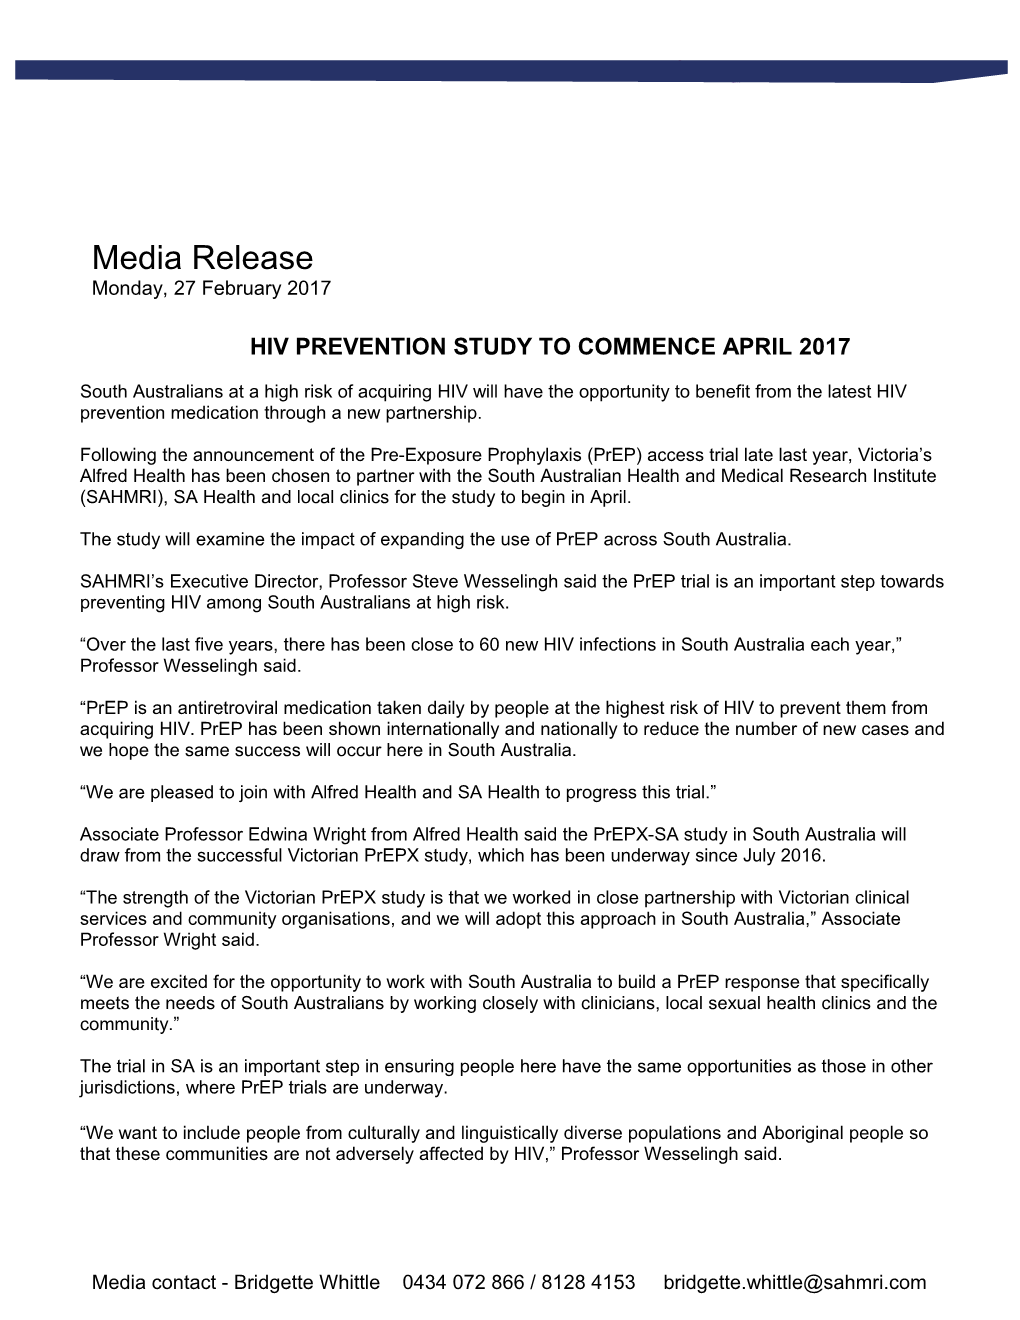 Hiv Prevention Study to Commence April 2017